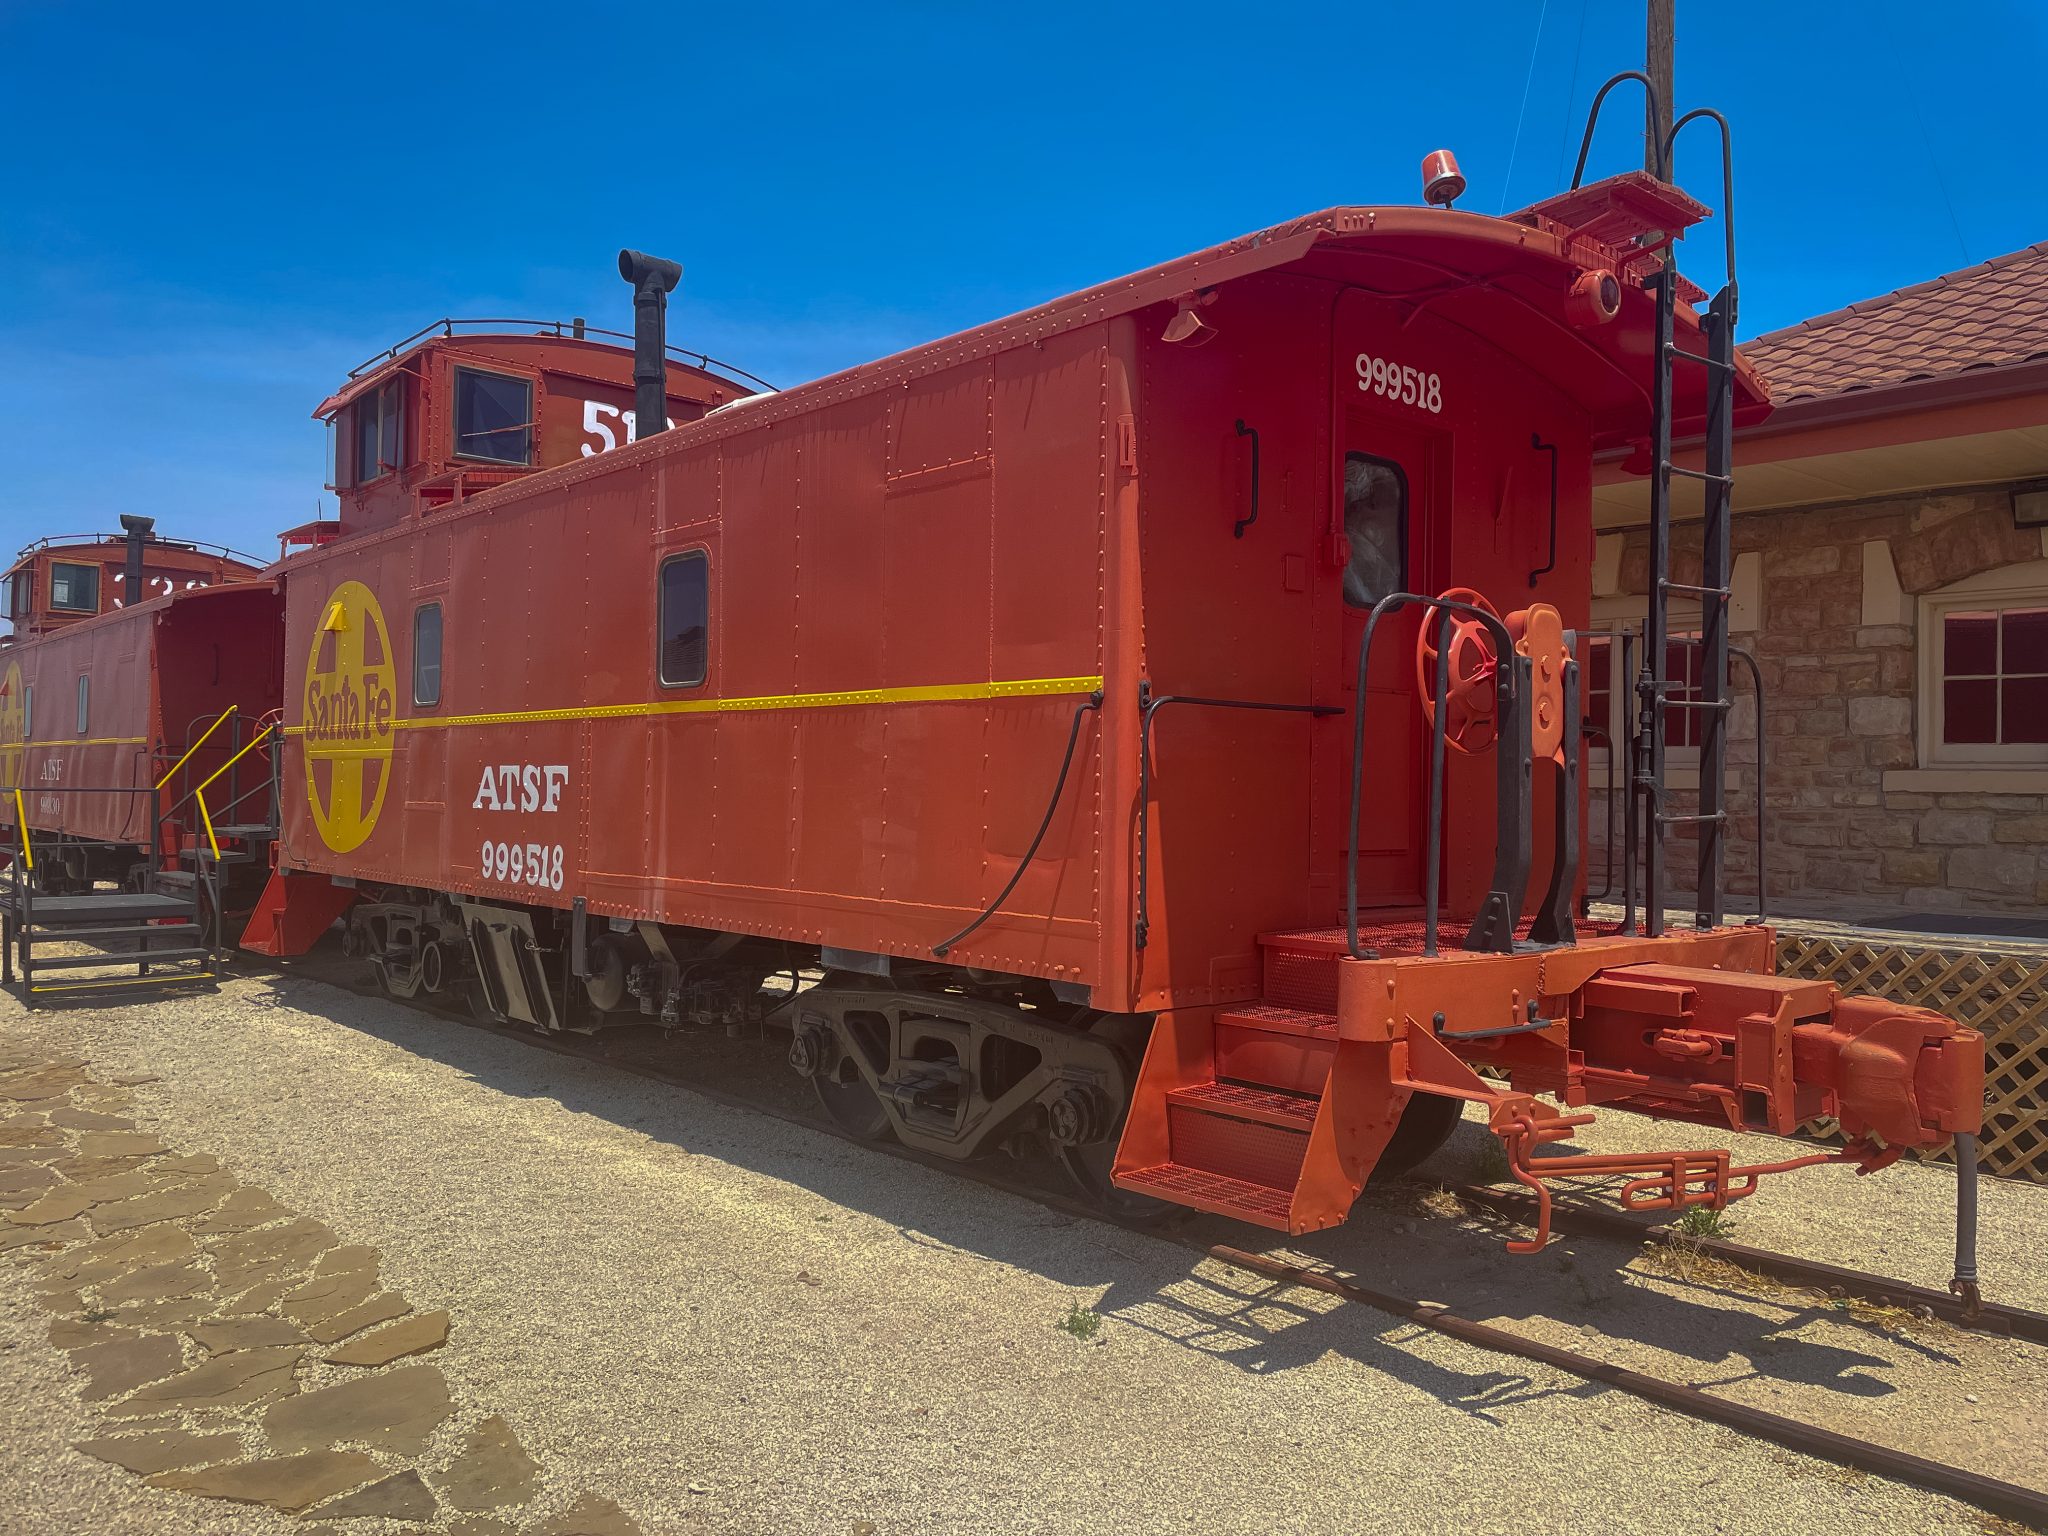 An Atchison Topeka and Santa Fe caboose on display in Fort Stockton, Texas